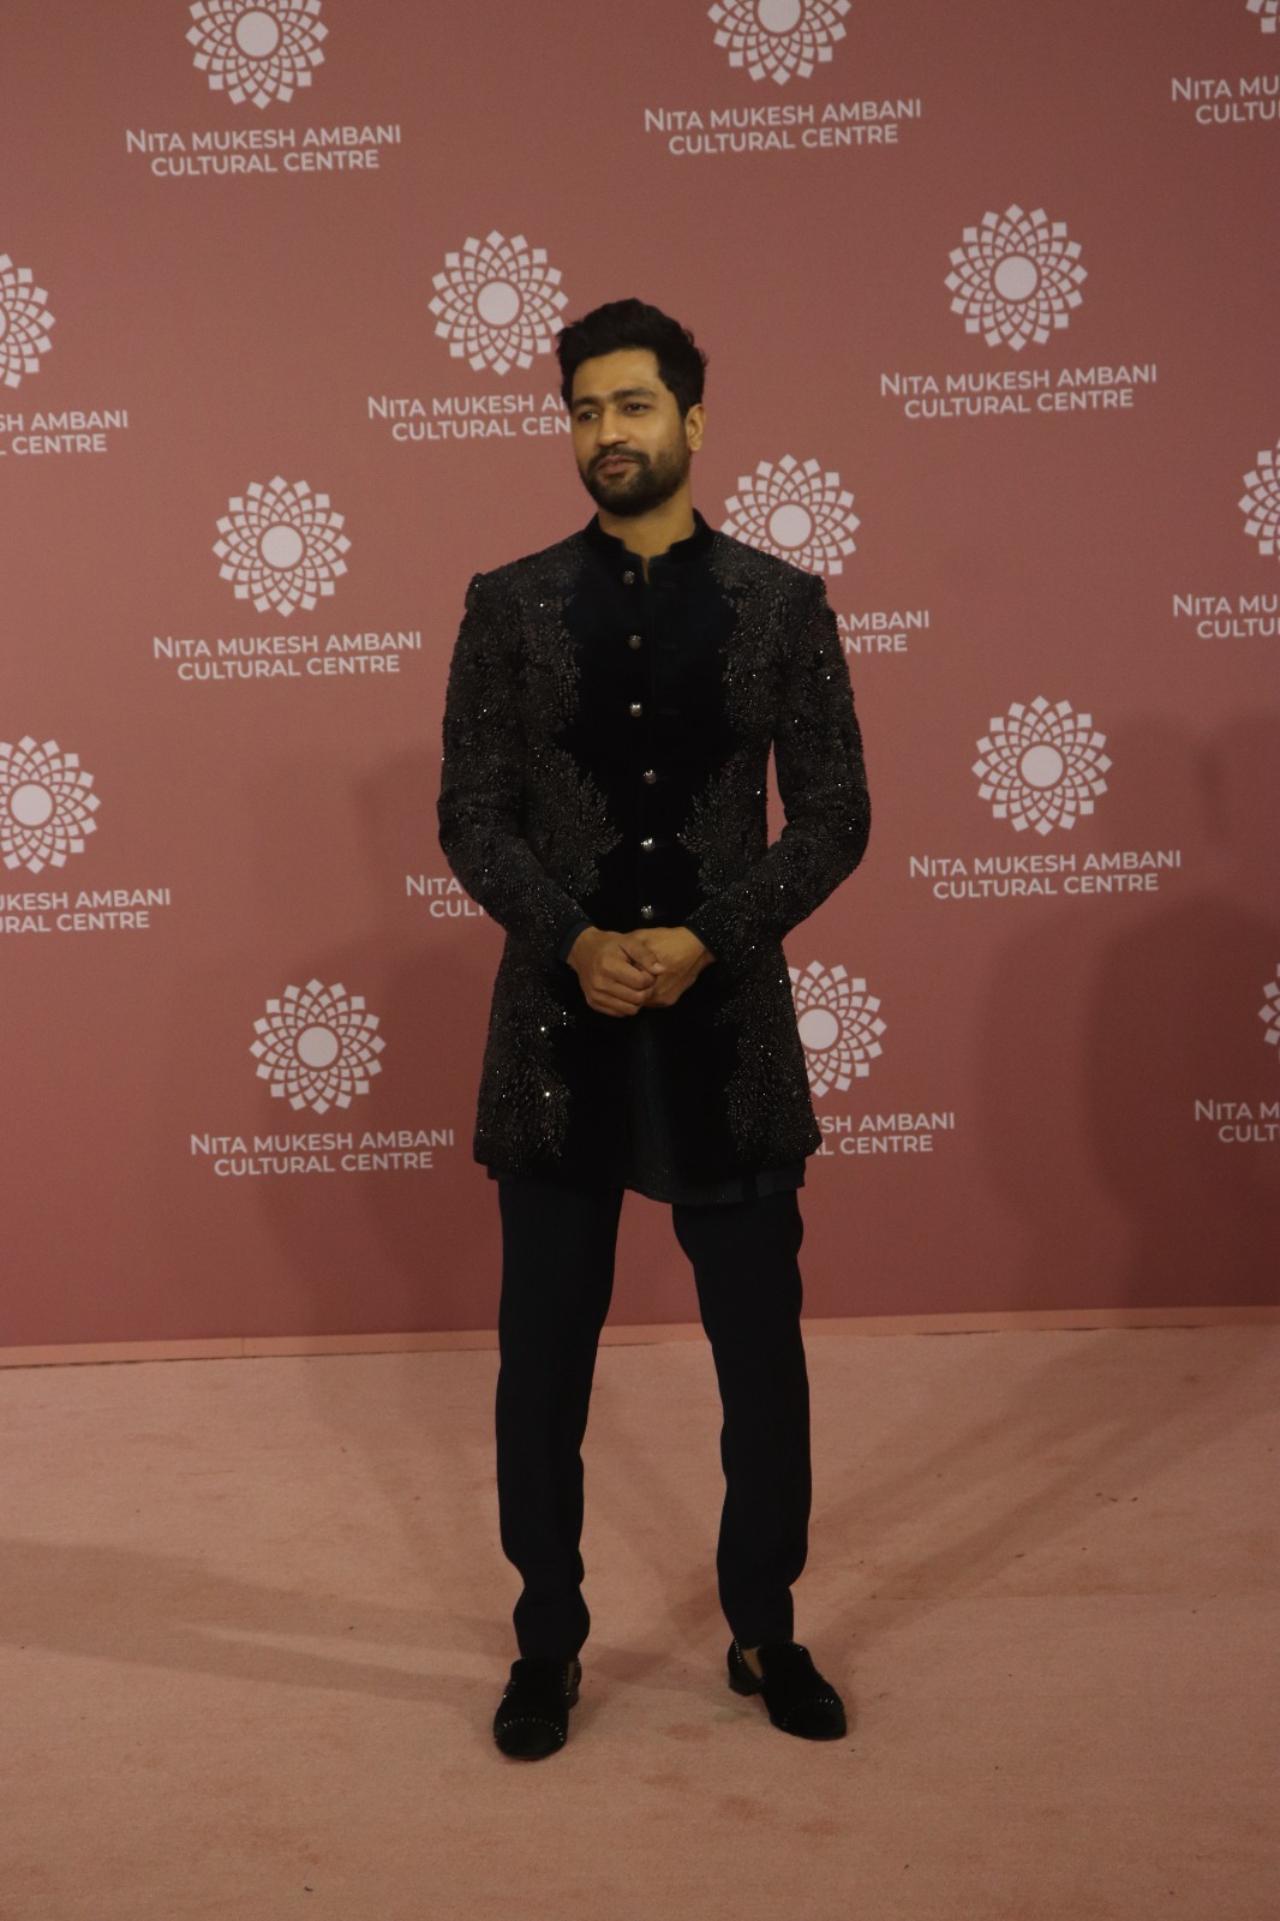 Vicky Kaushal looked dapper in an all-black outfit for the day 2 event of the grand opening of NMACC